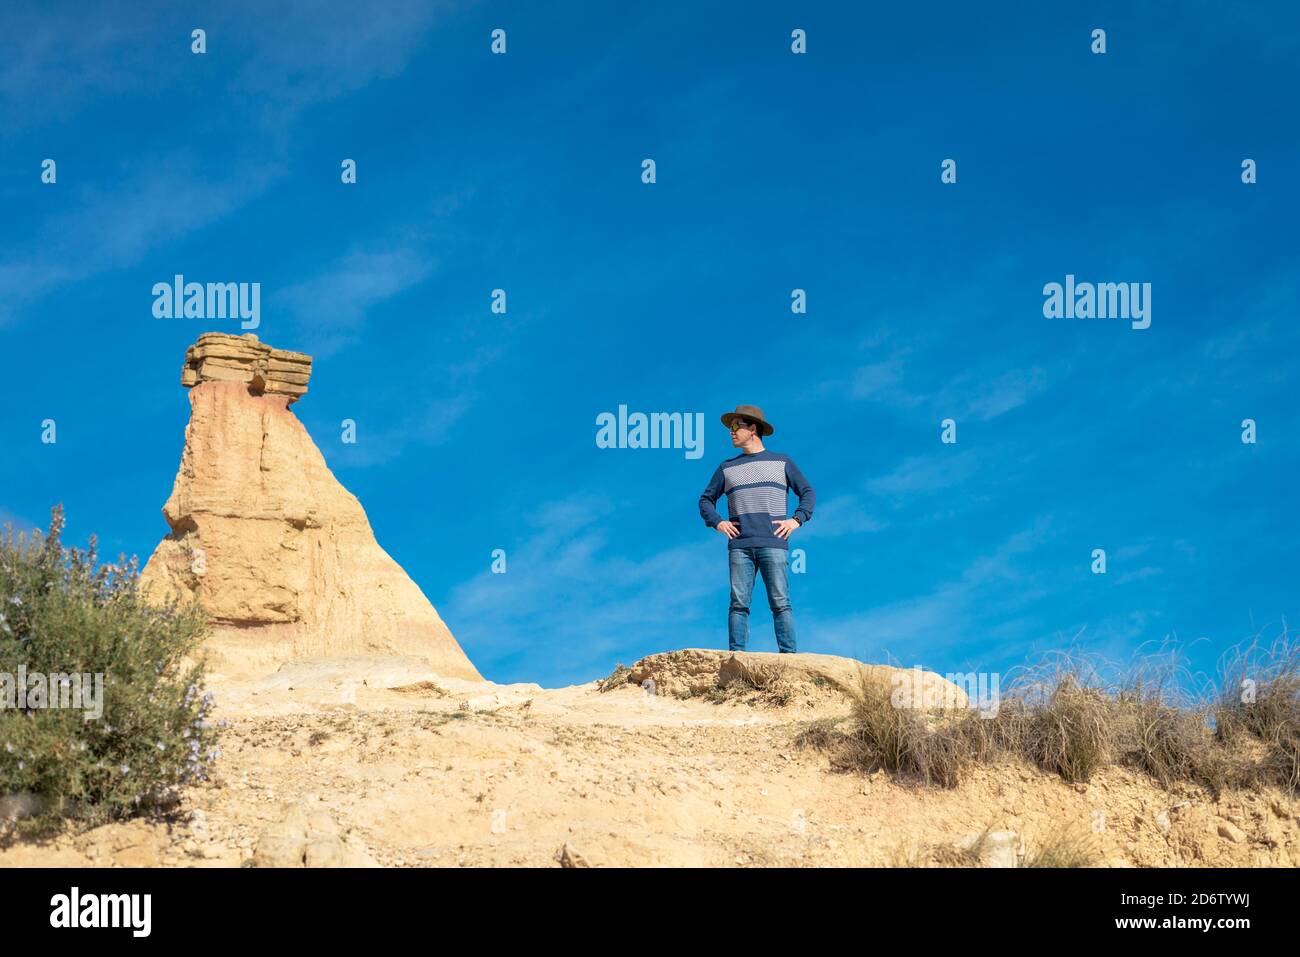 Front view of a man with hat and sunglasses standing on desert dunes against a rock peak Stock Photo